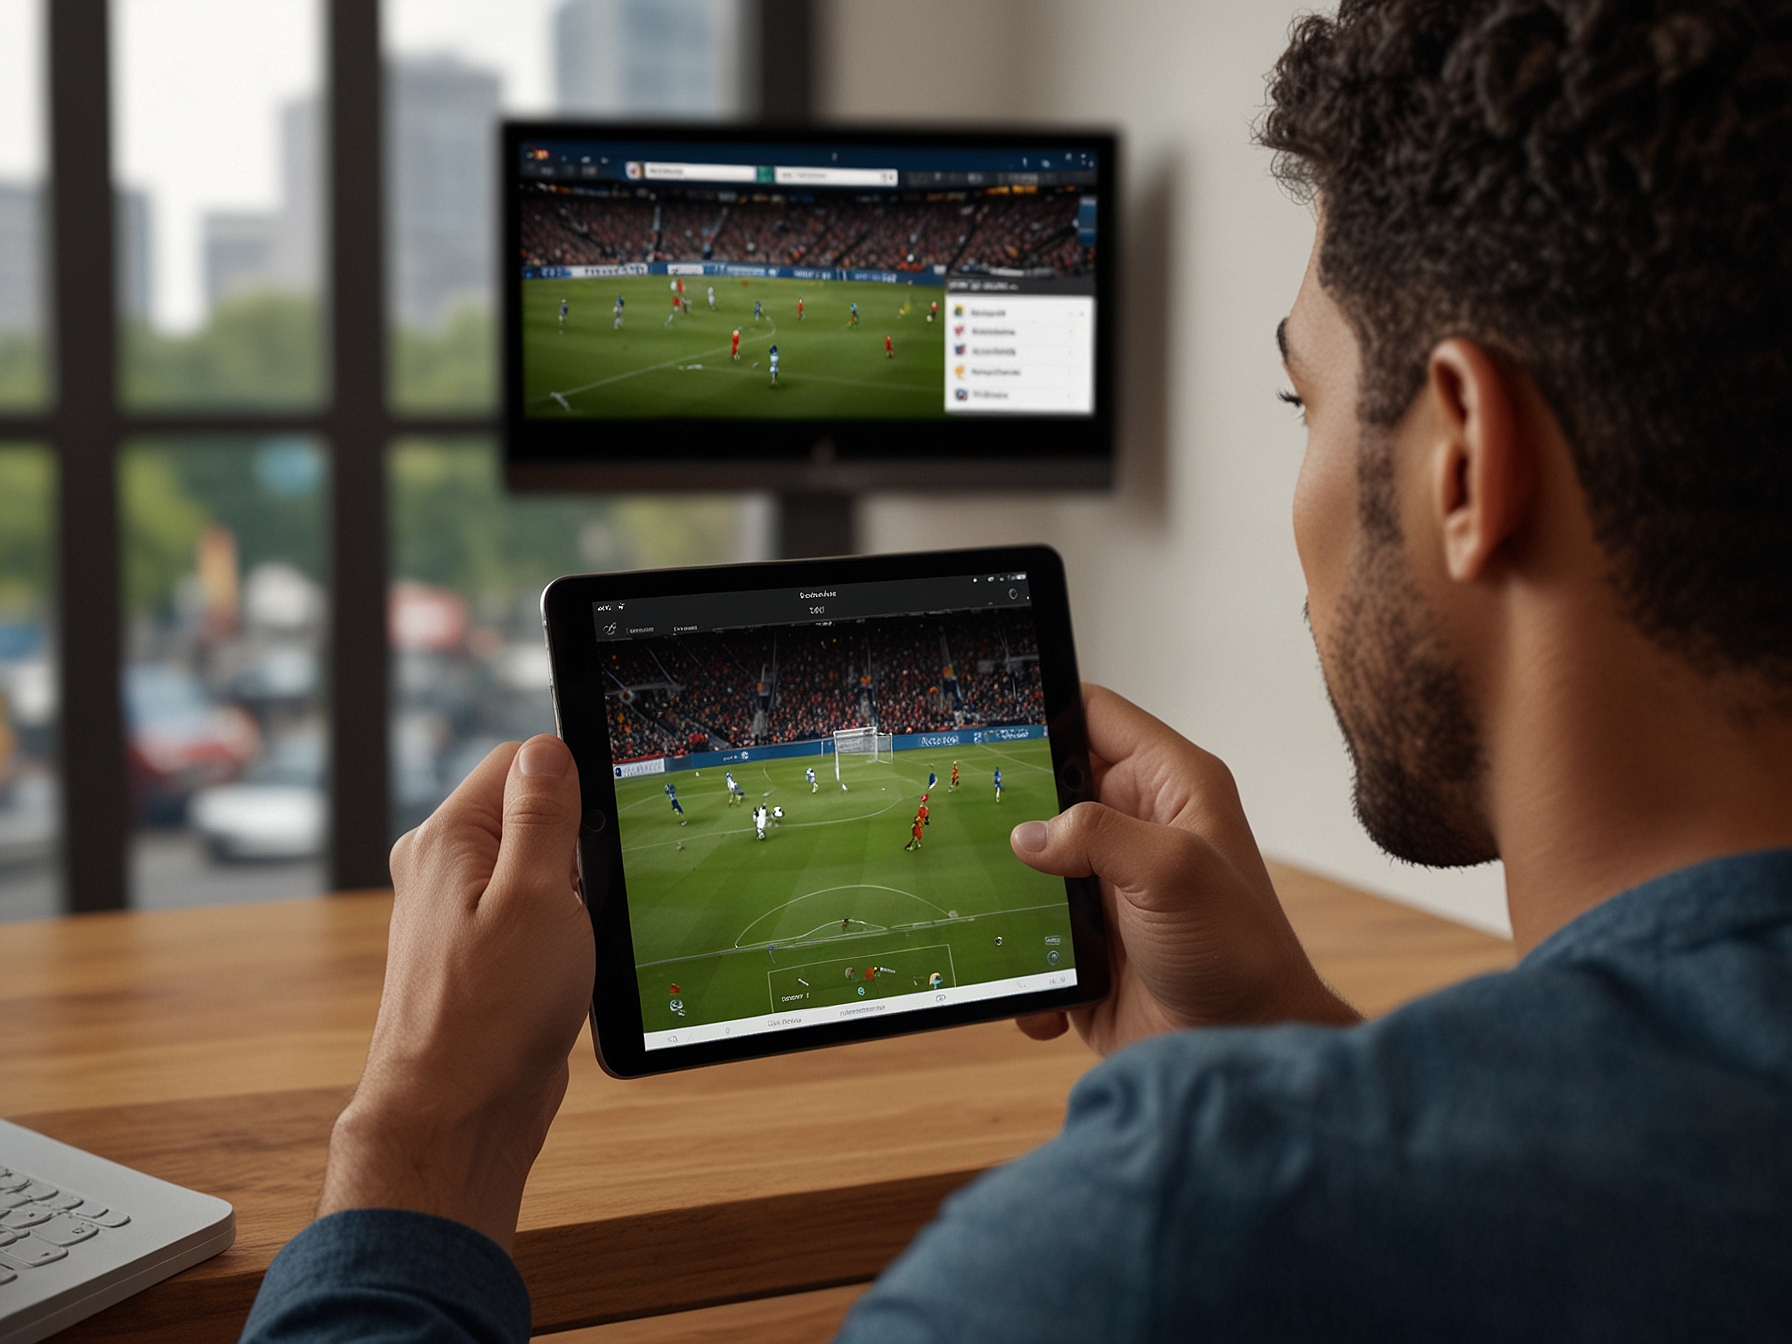 A soccer fan using the Apple TV app on a tablet, accessing the 'Catch Up' feature to watch key moments of an MLS game they joined late.